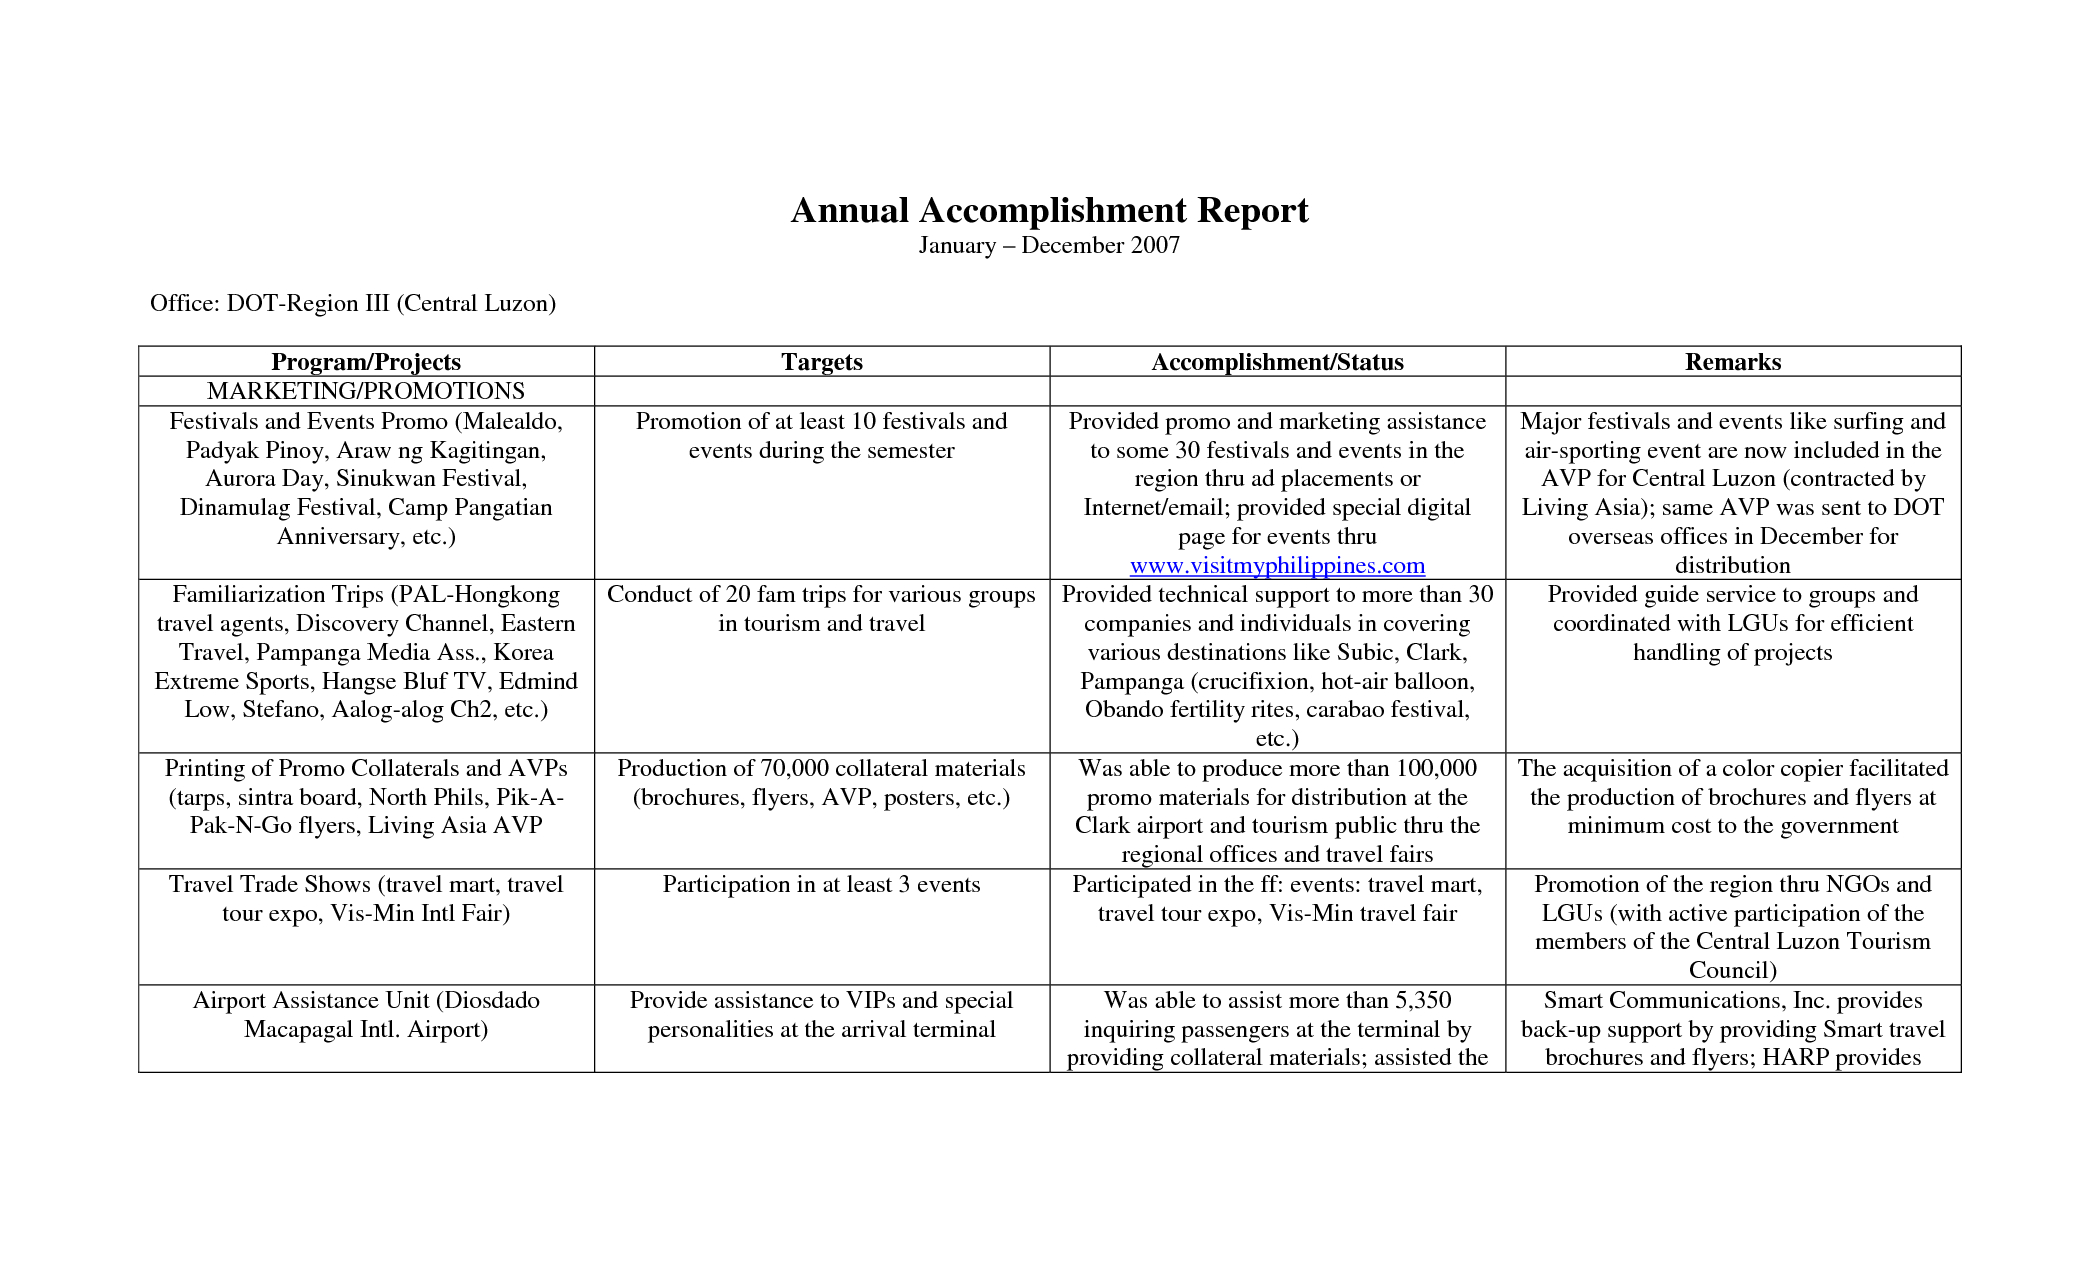 Terrific Annual Accomplishment Report Sample : V M D Pertaining To Weekly Accomplishment Report Template